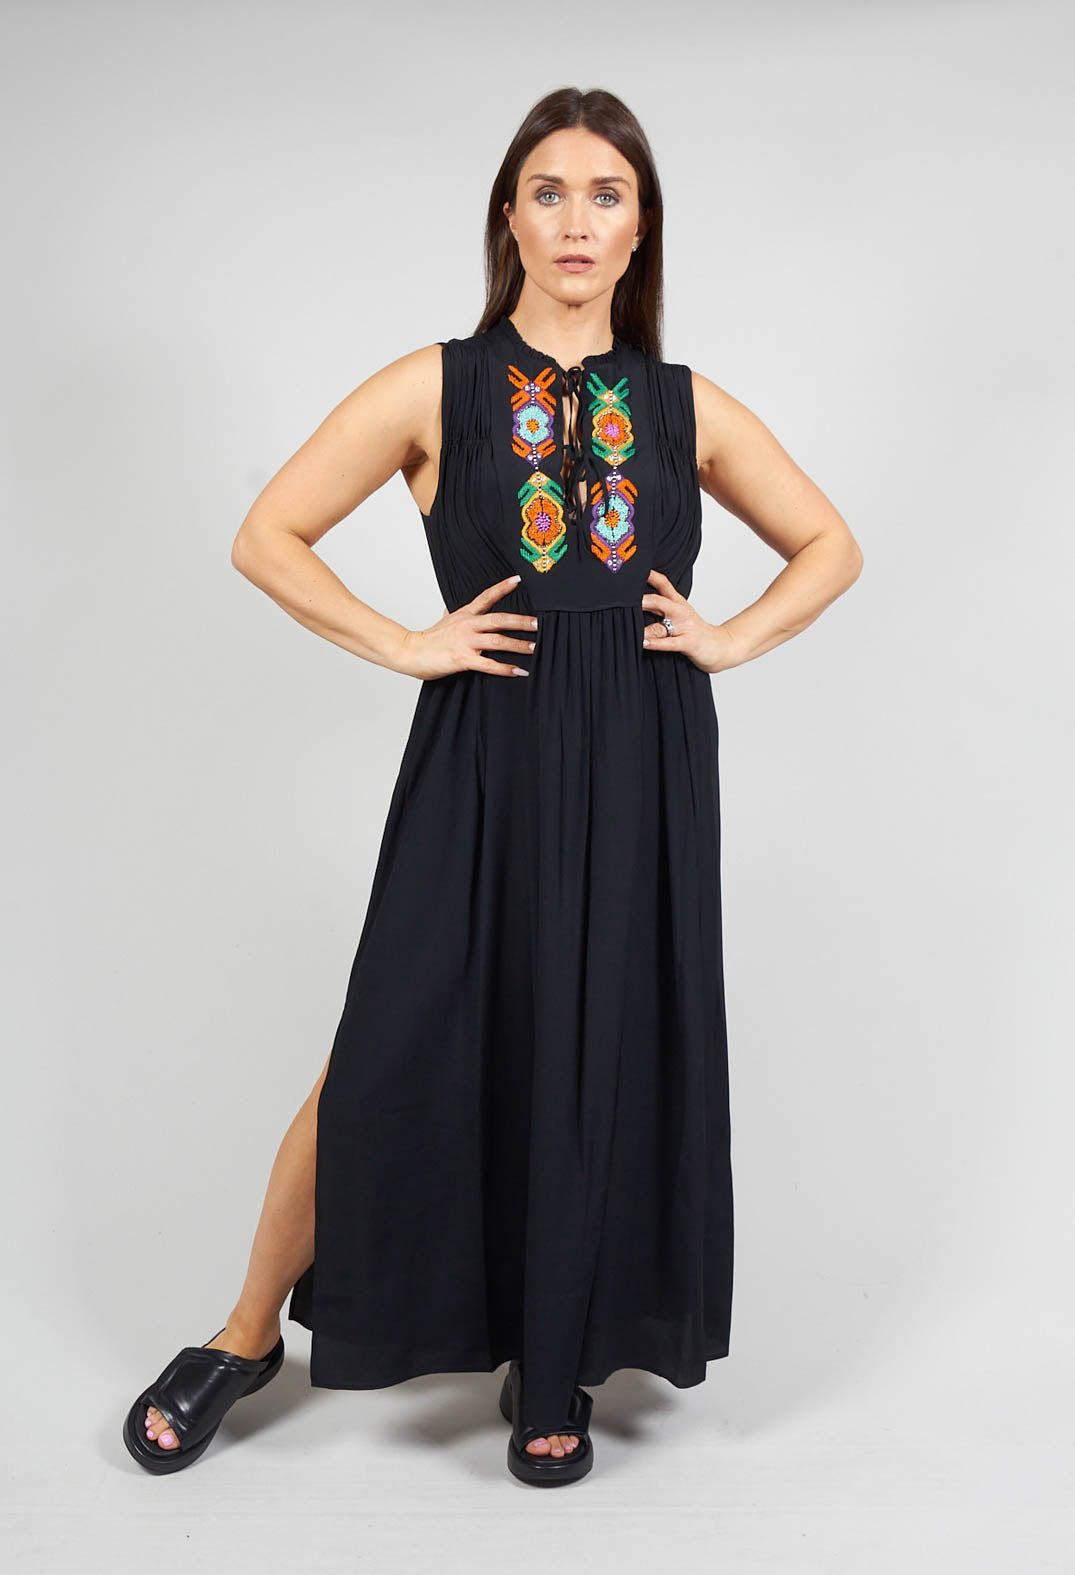 lady wearing black Beatrice B maxi dress with embellished detail